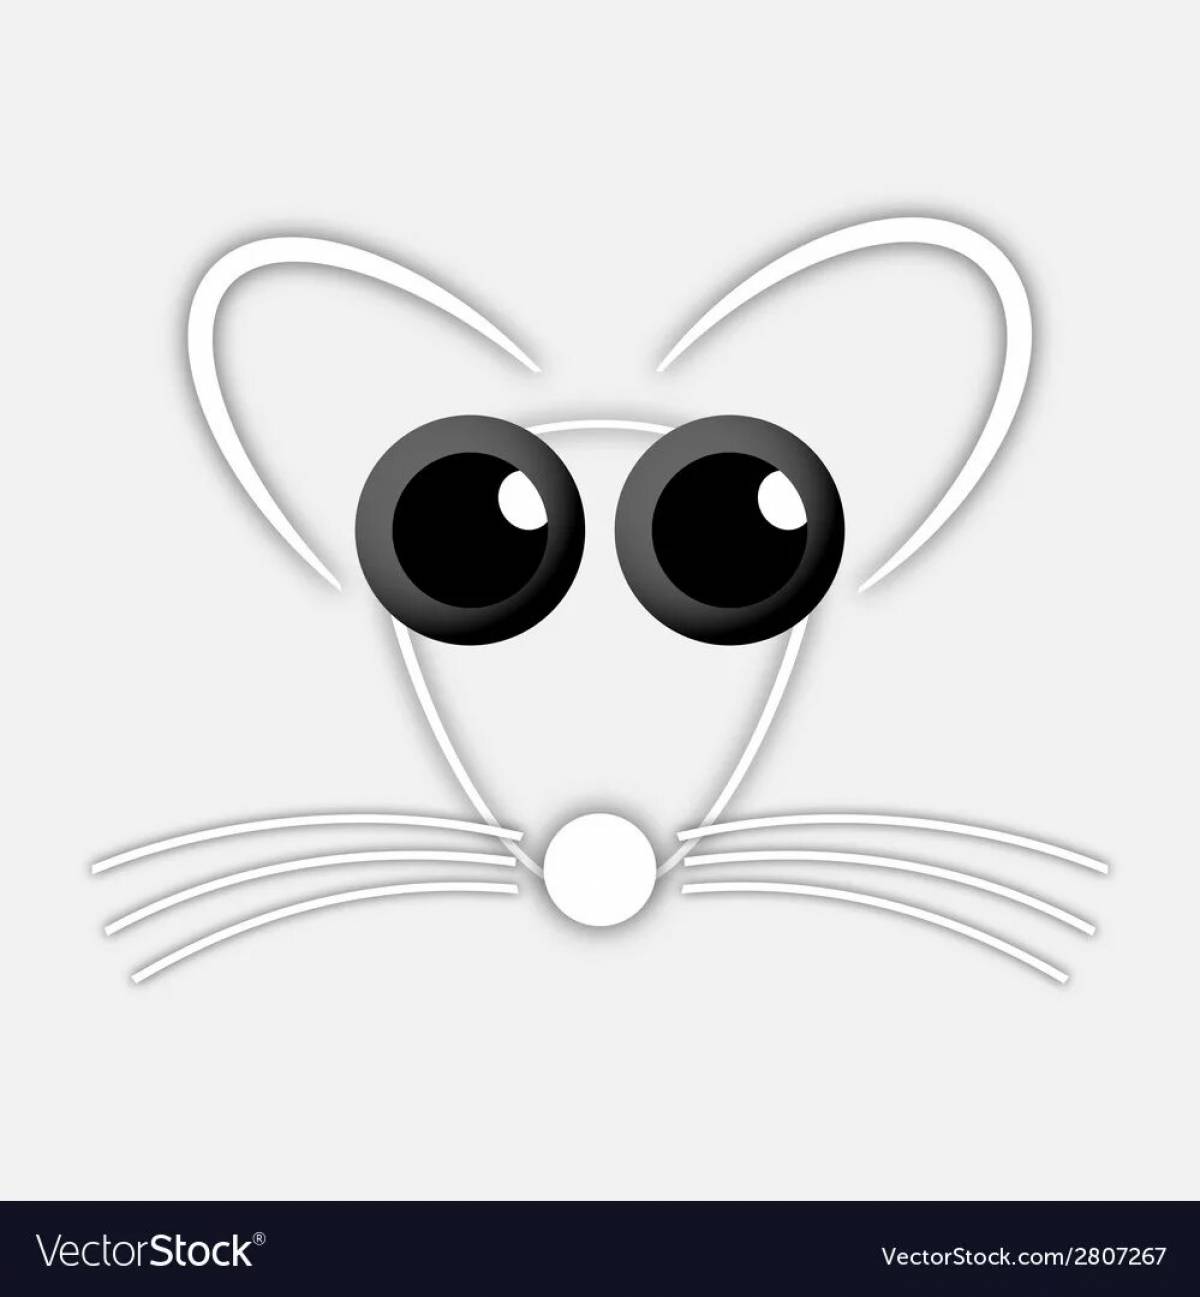 Glasses mouse #11